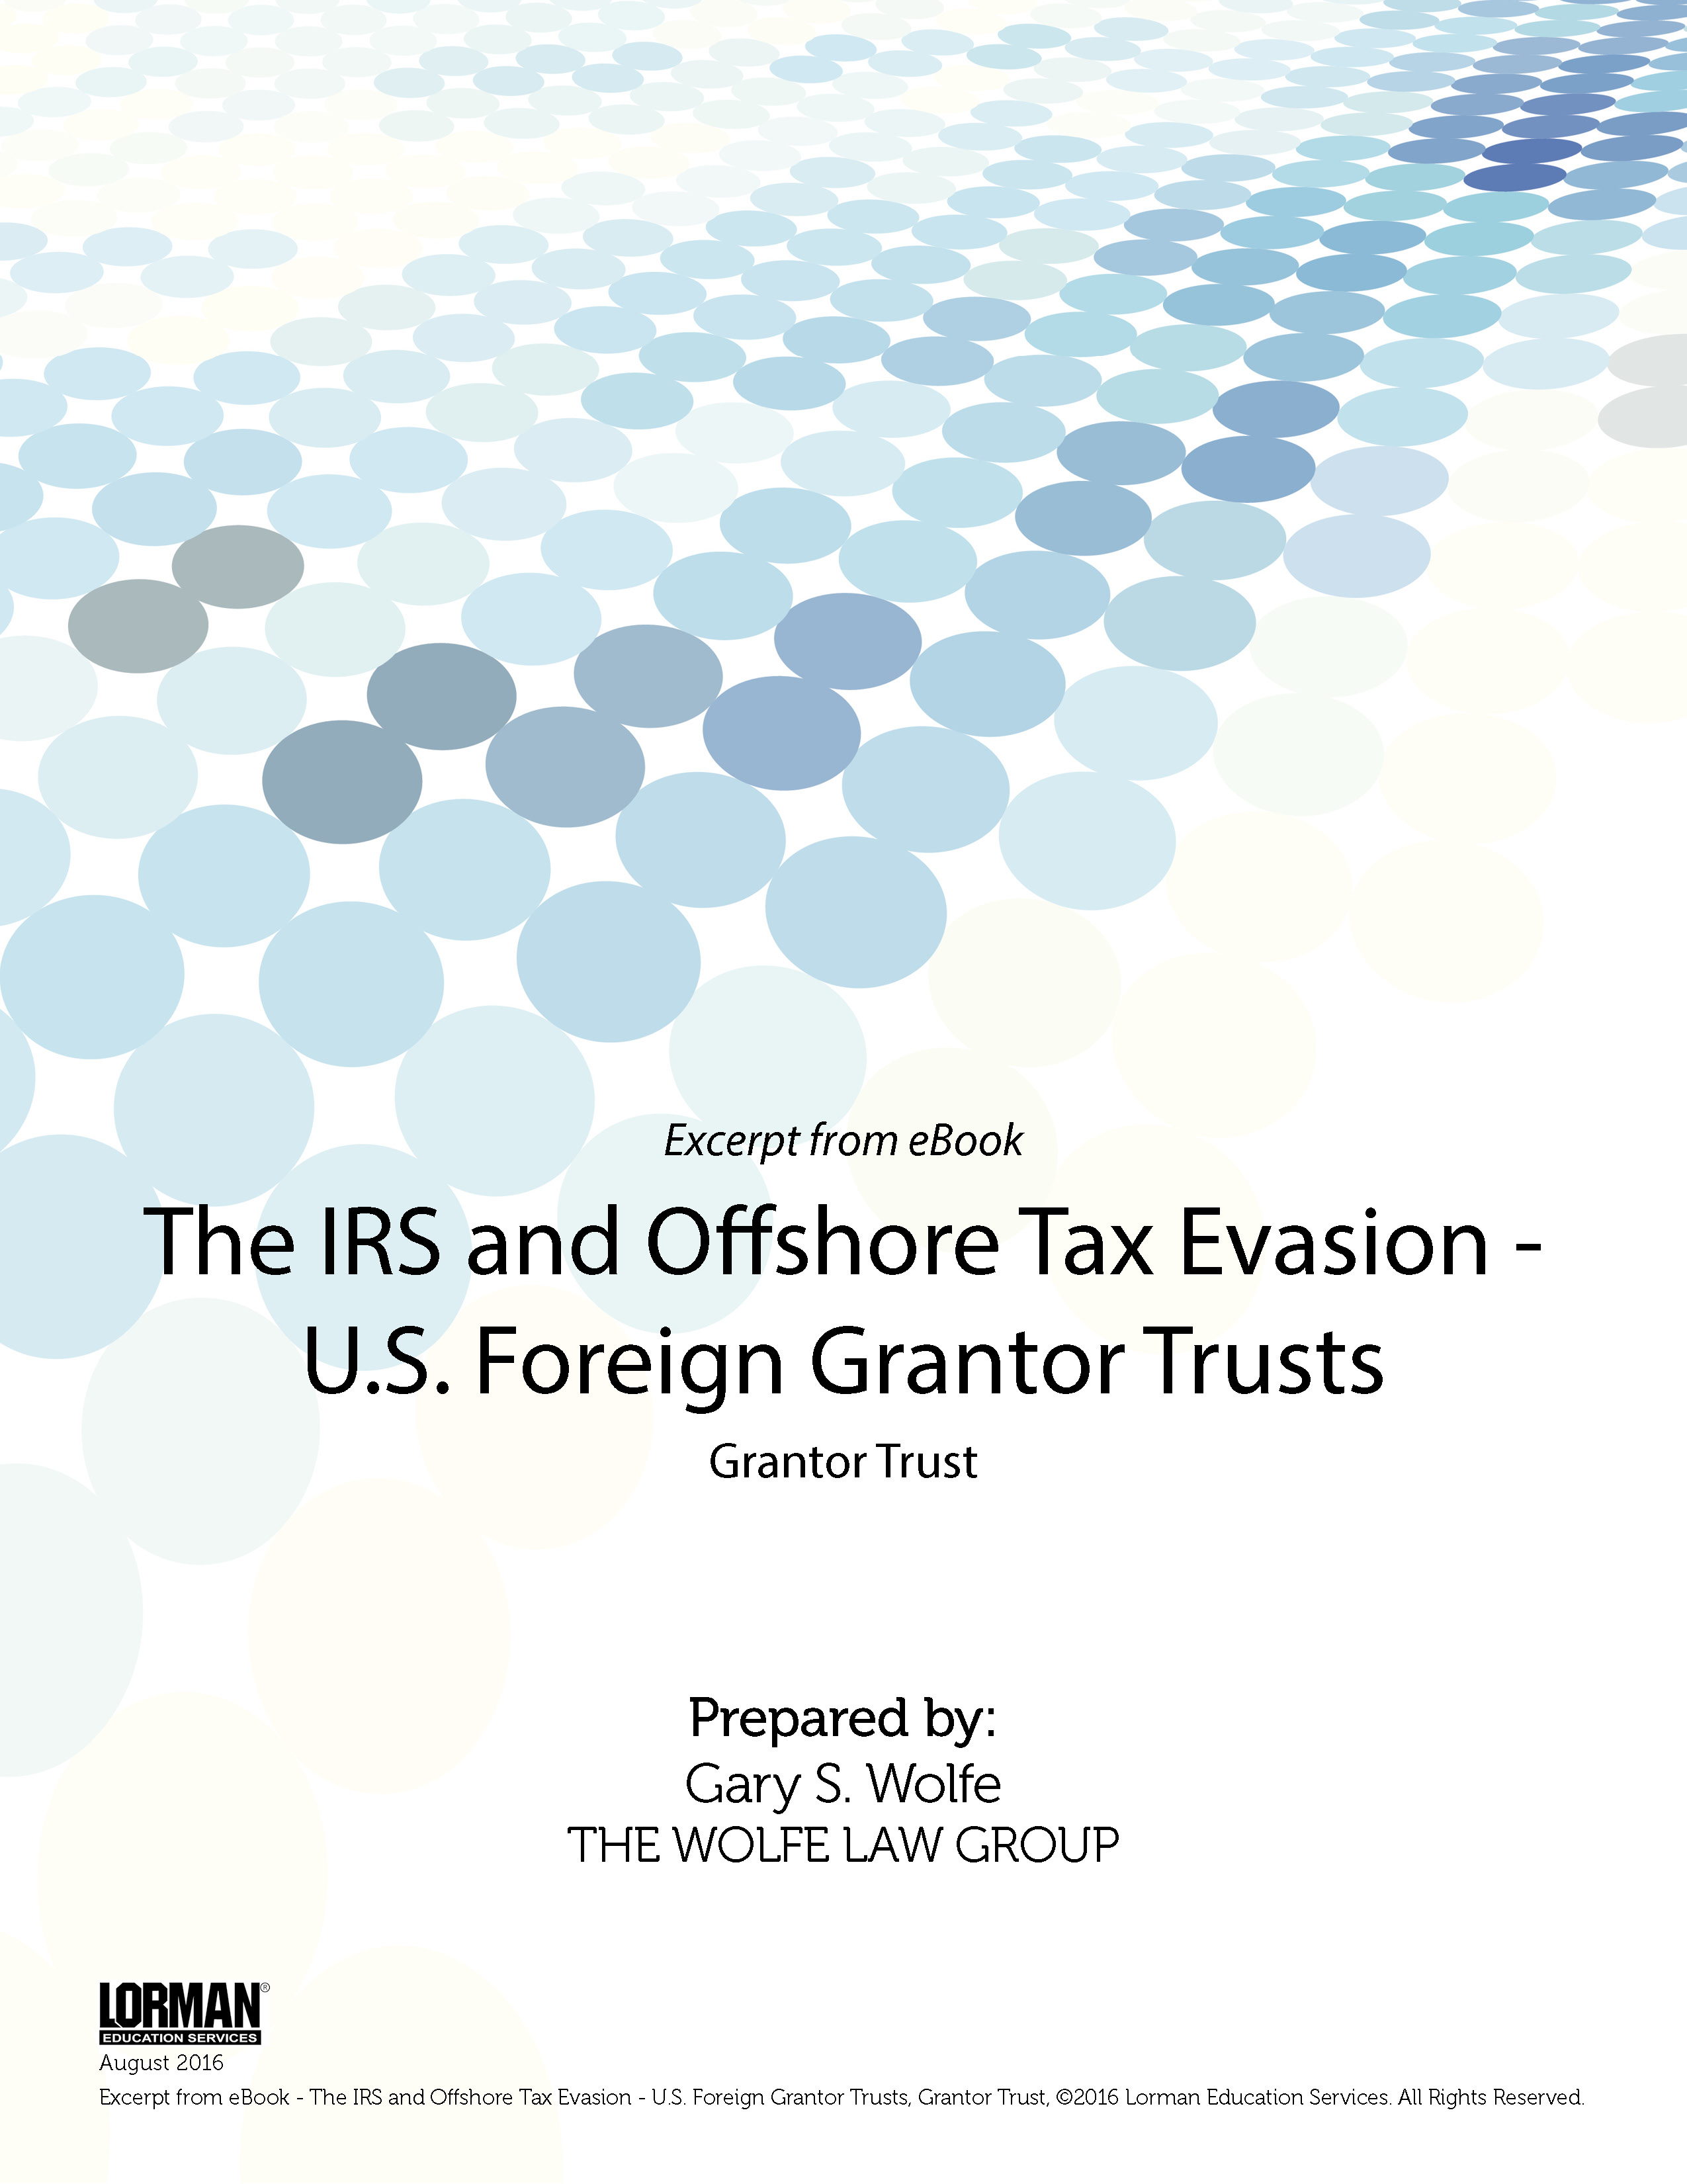 The IRS and Offshore Tax Evasion - U.S. Foreign Grantor Trusts: Grantor Trust